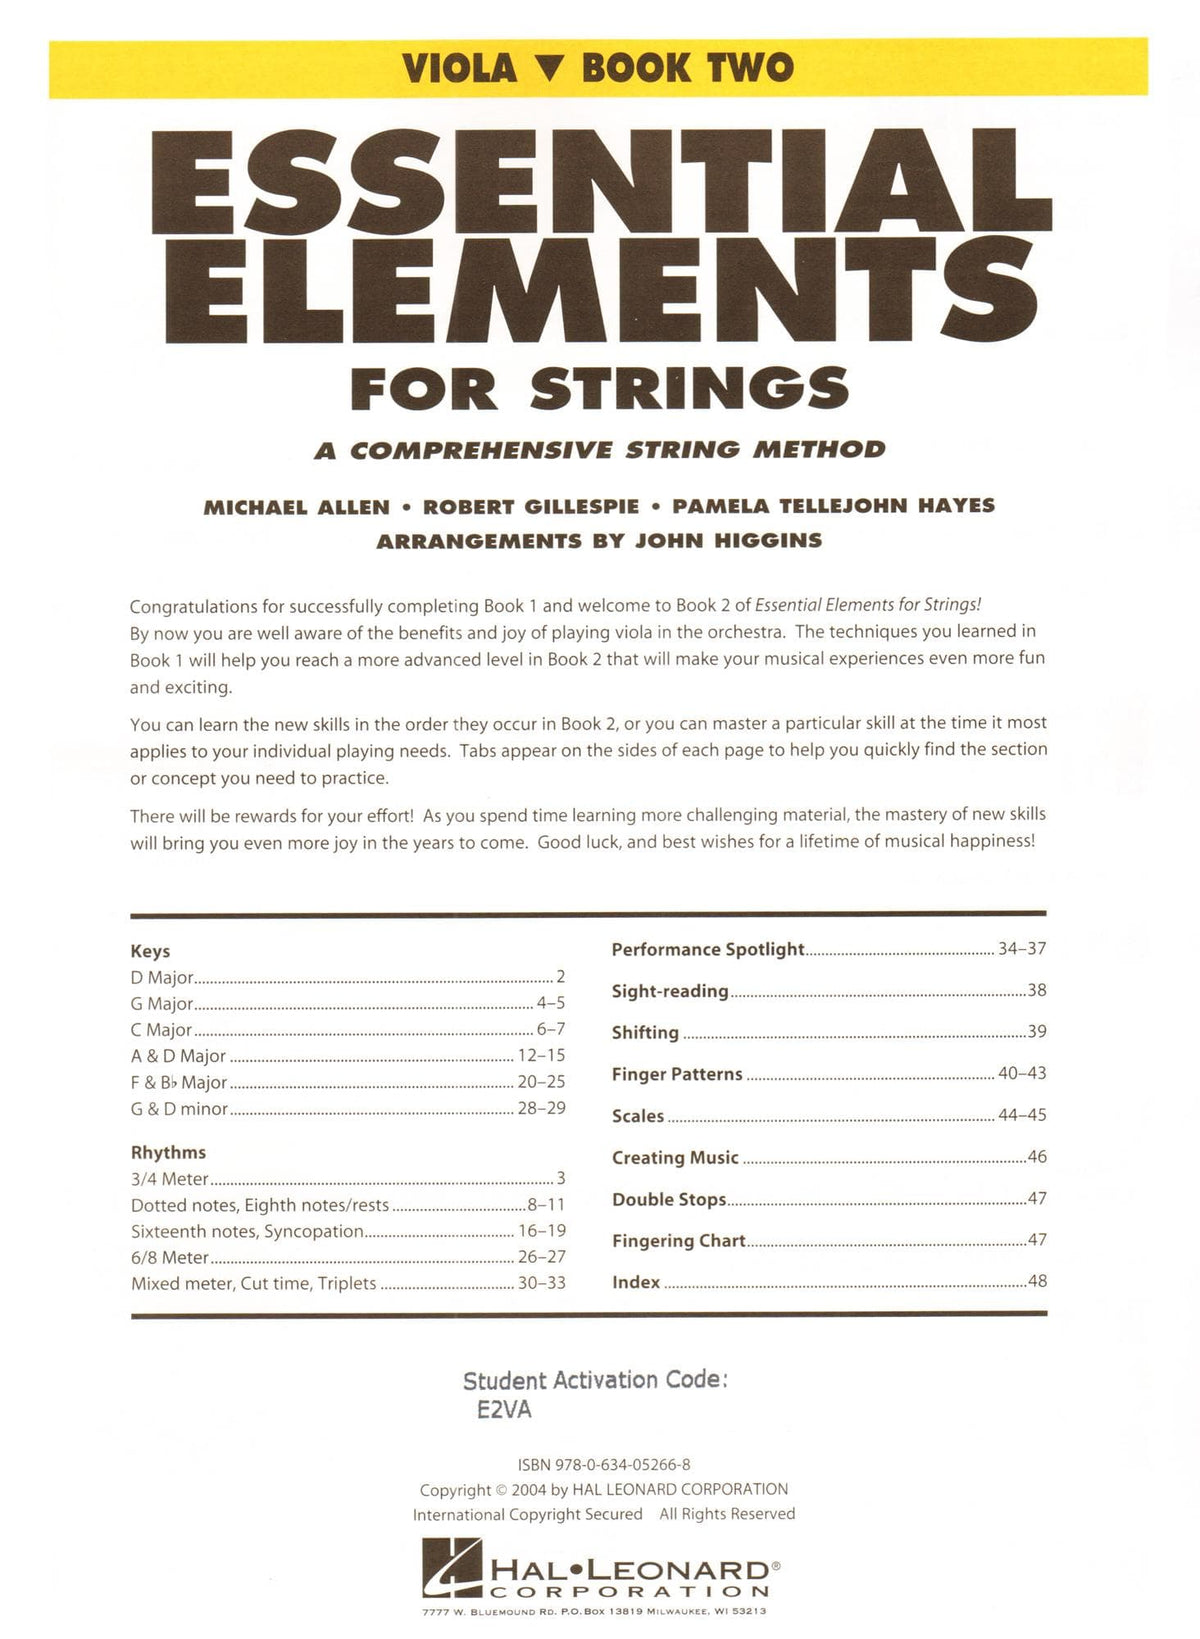 Essential Elements Interactive (formerly 2000) for Strings - Viola Book 2 - by Allen/Gillespie/Hayes - Hal Leonard Publication